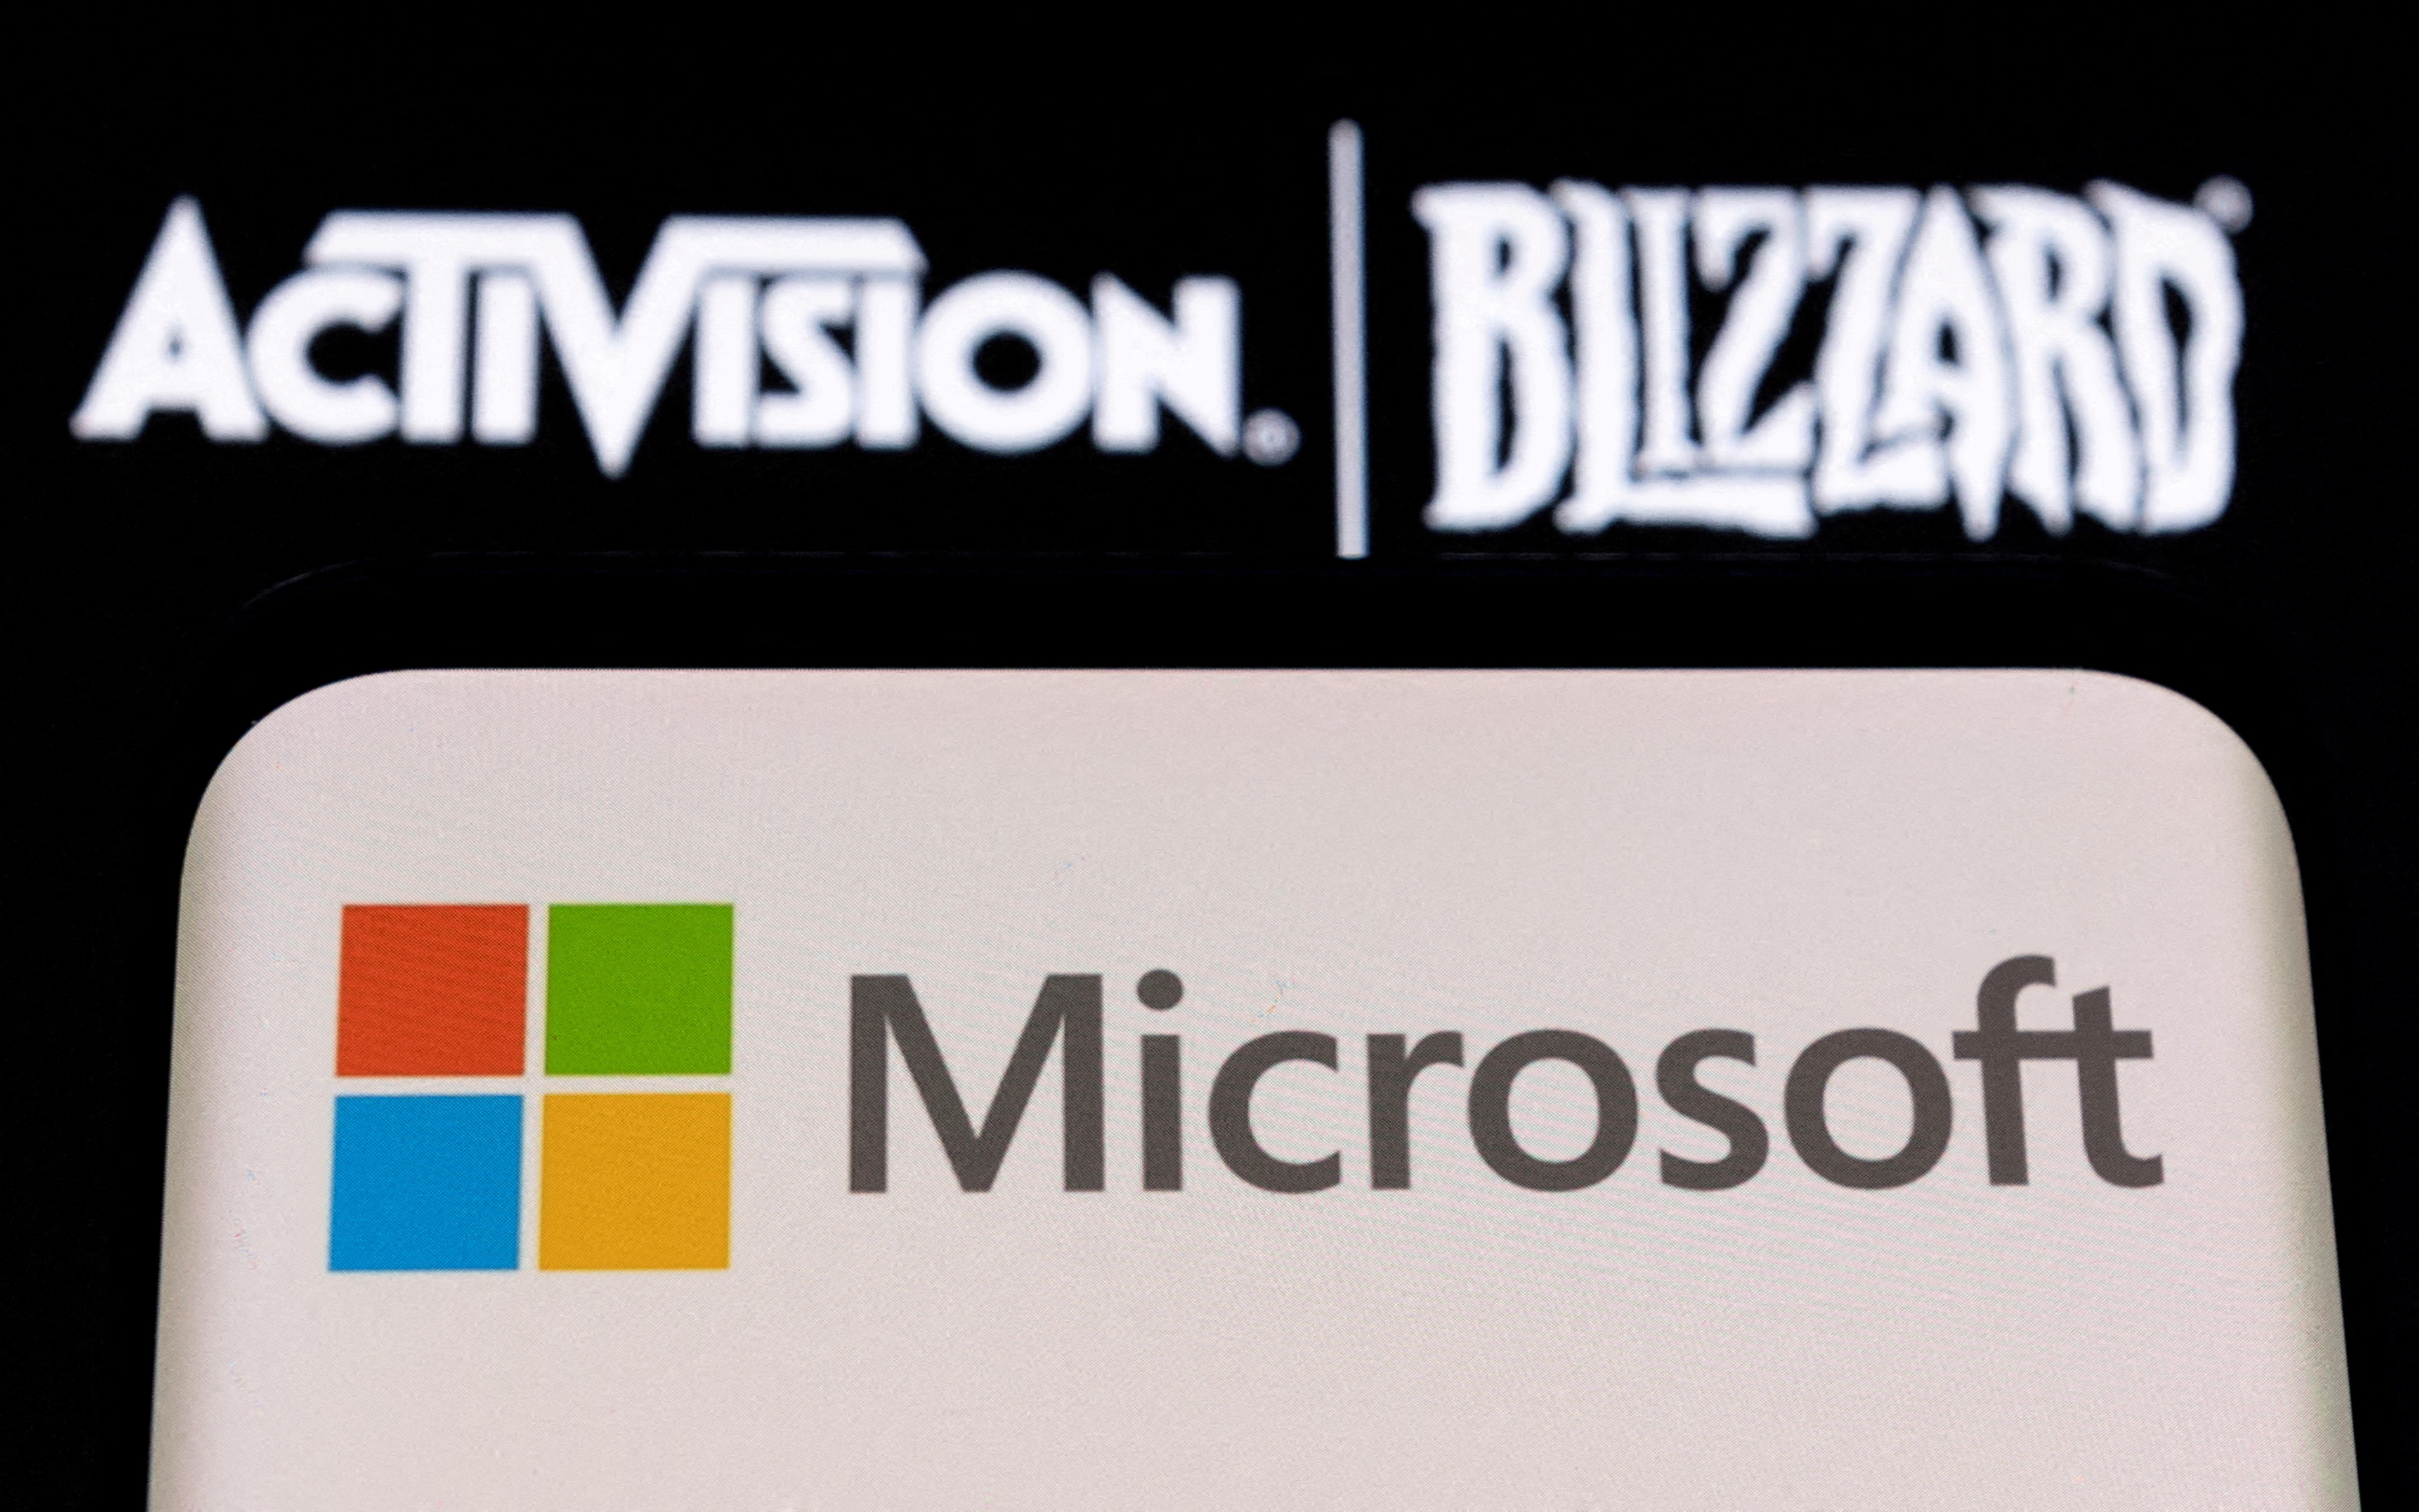 Microsoft's Activision Blizzard deal gets preliminary approval